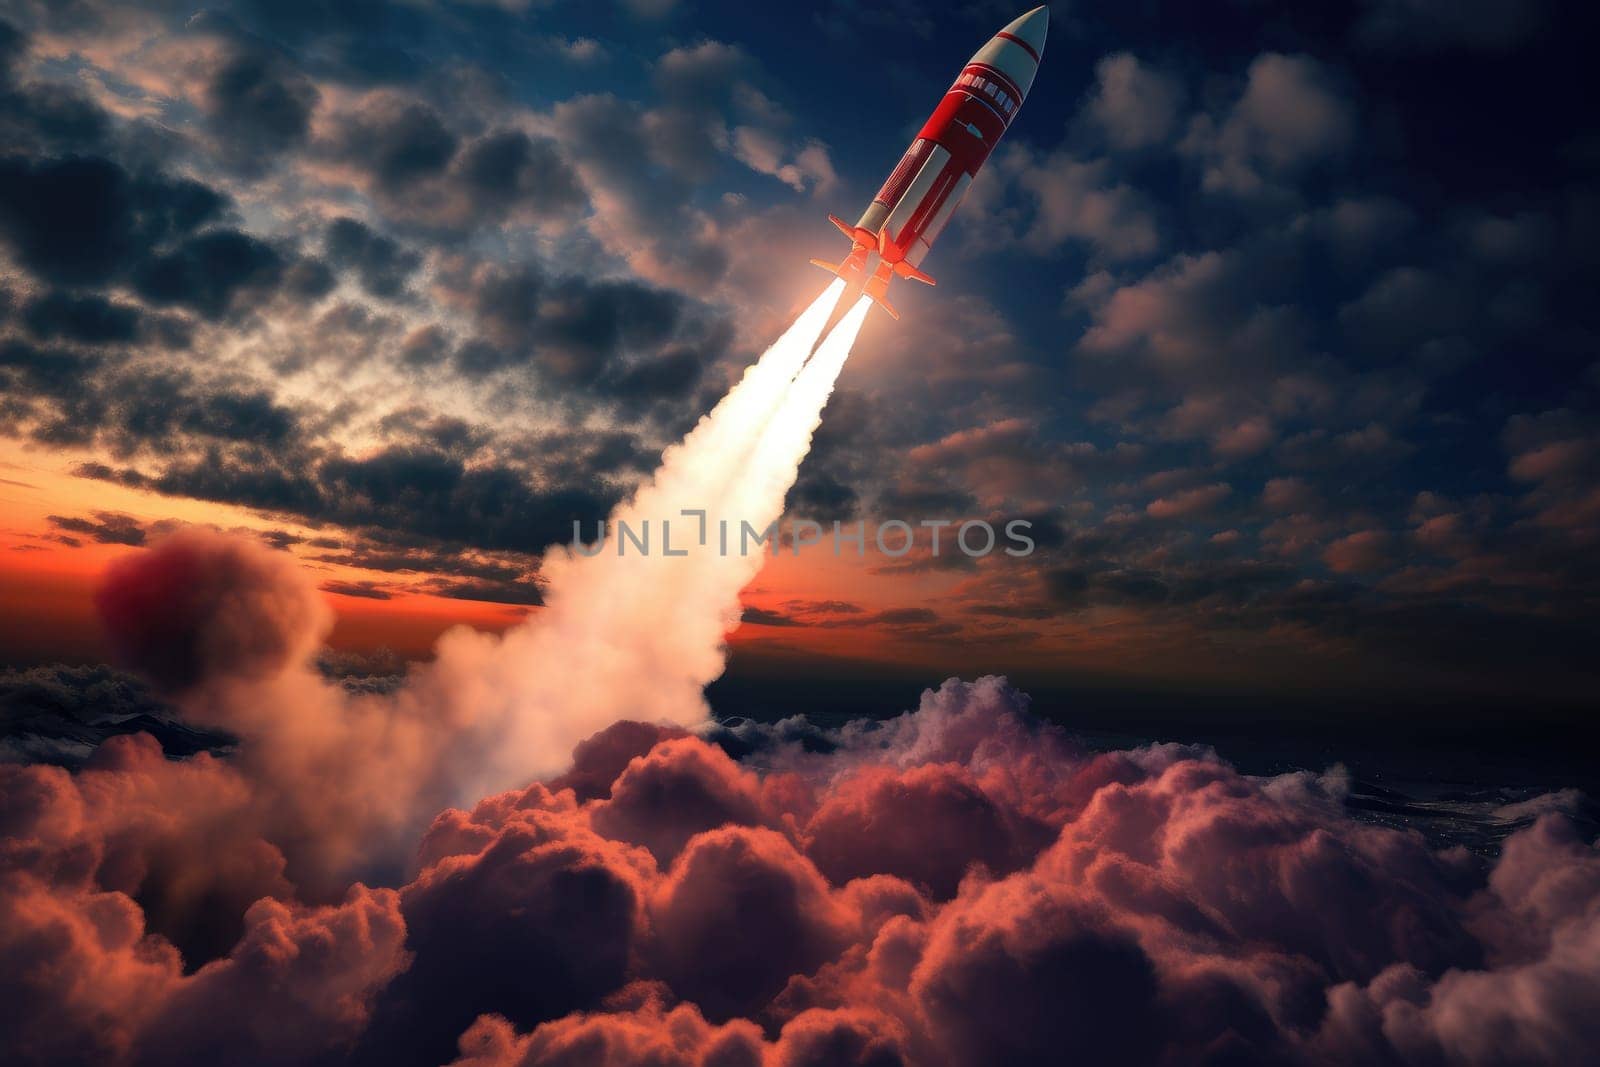 A stunning photo capturing a rocket launch with a satellite against the backdrop of the night sky, showcasing the thrilling concept of space exploration and mission.